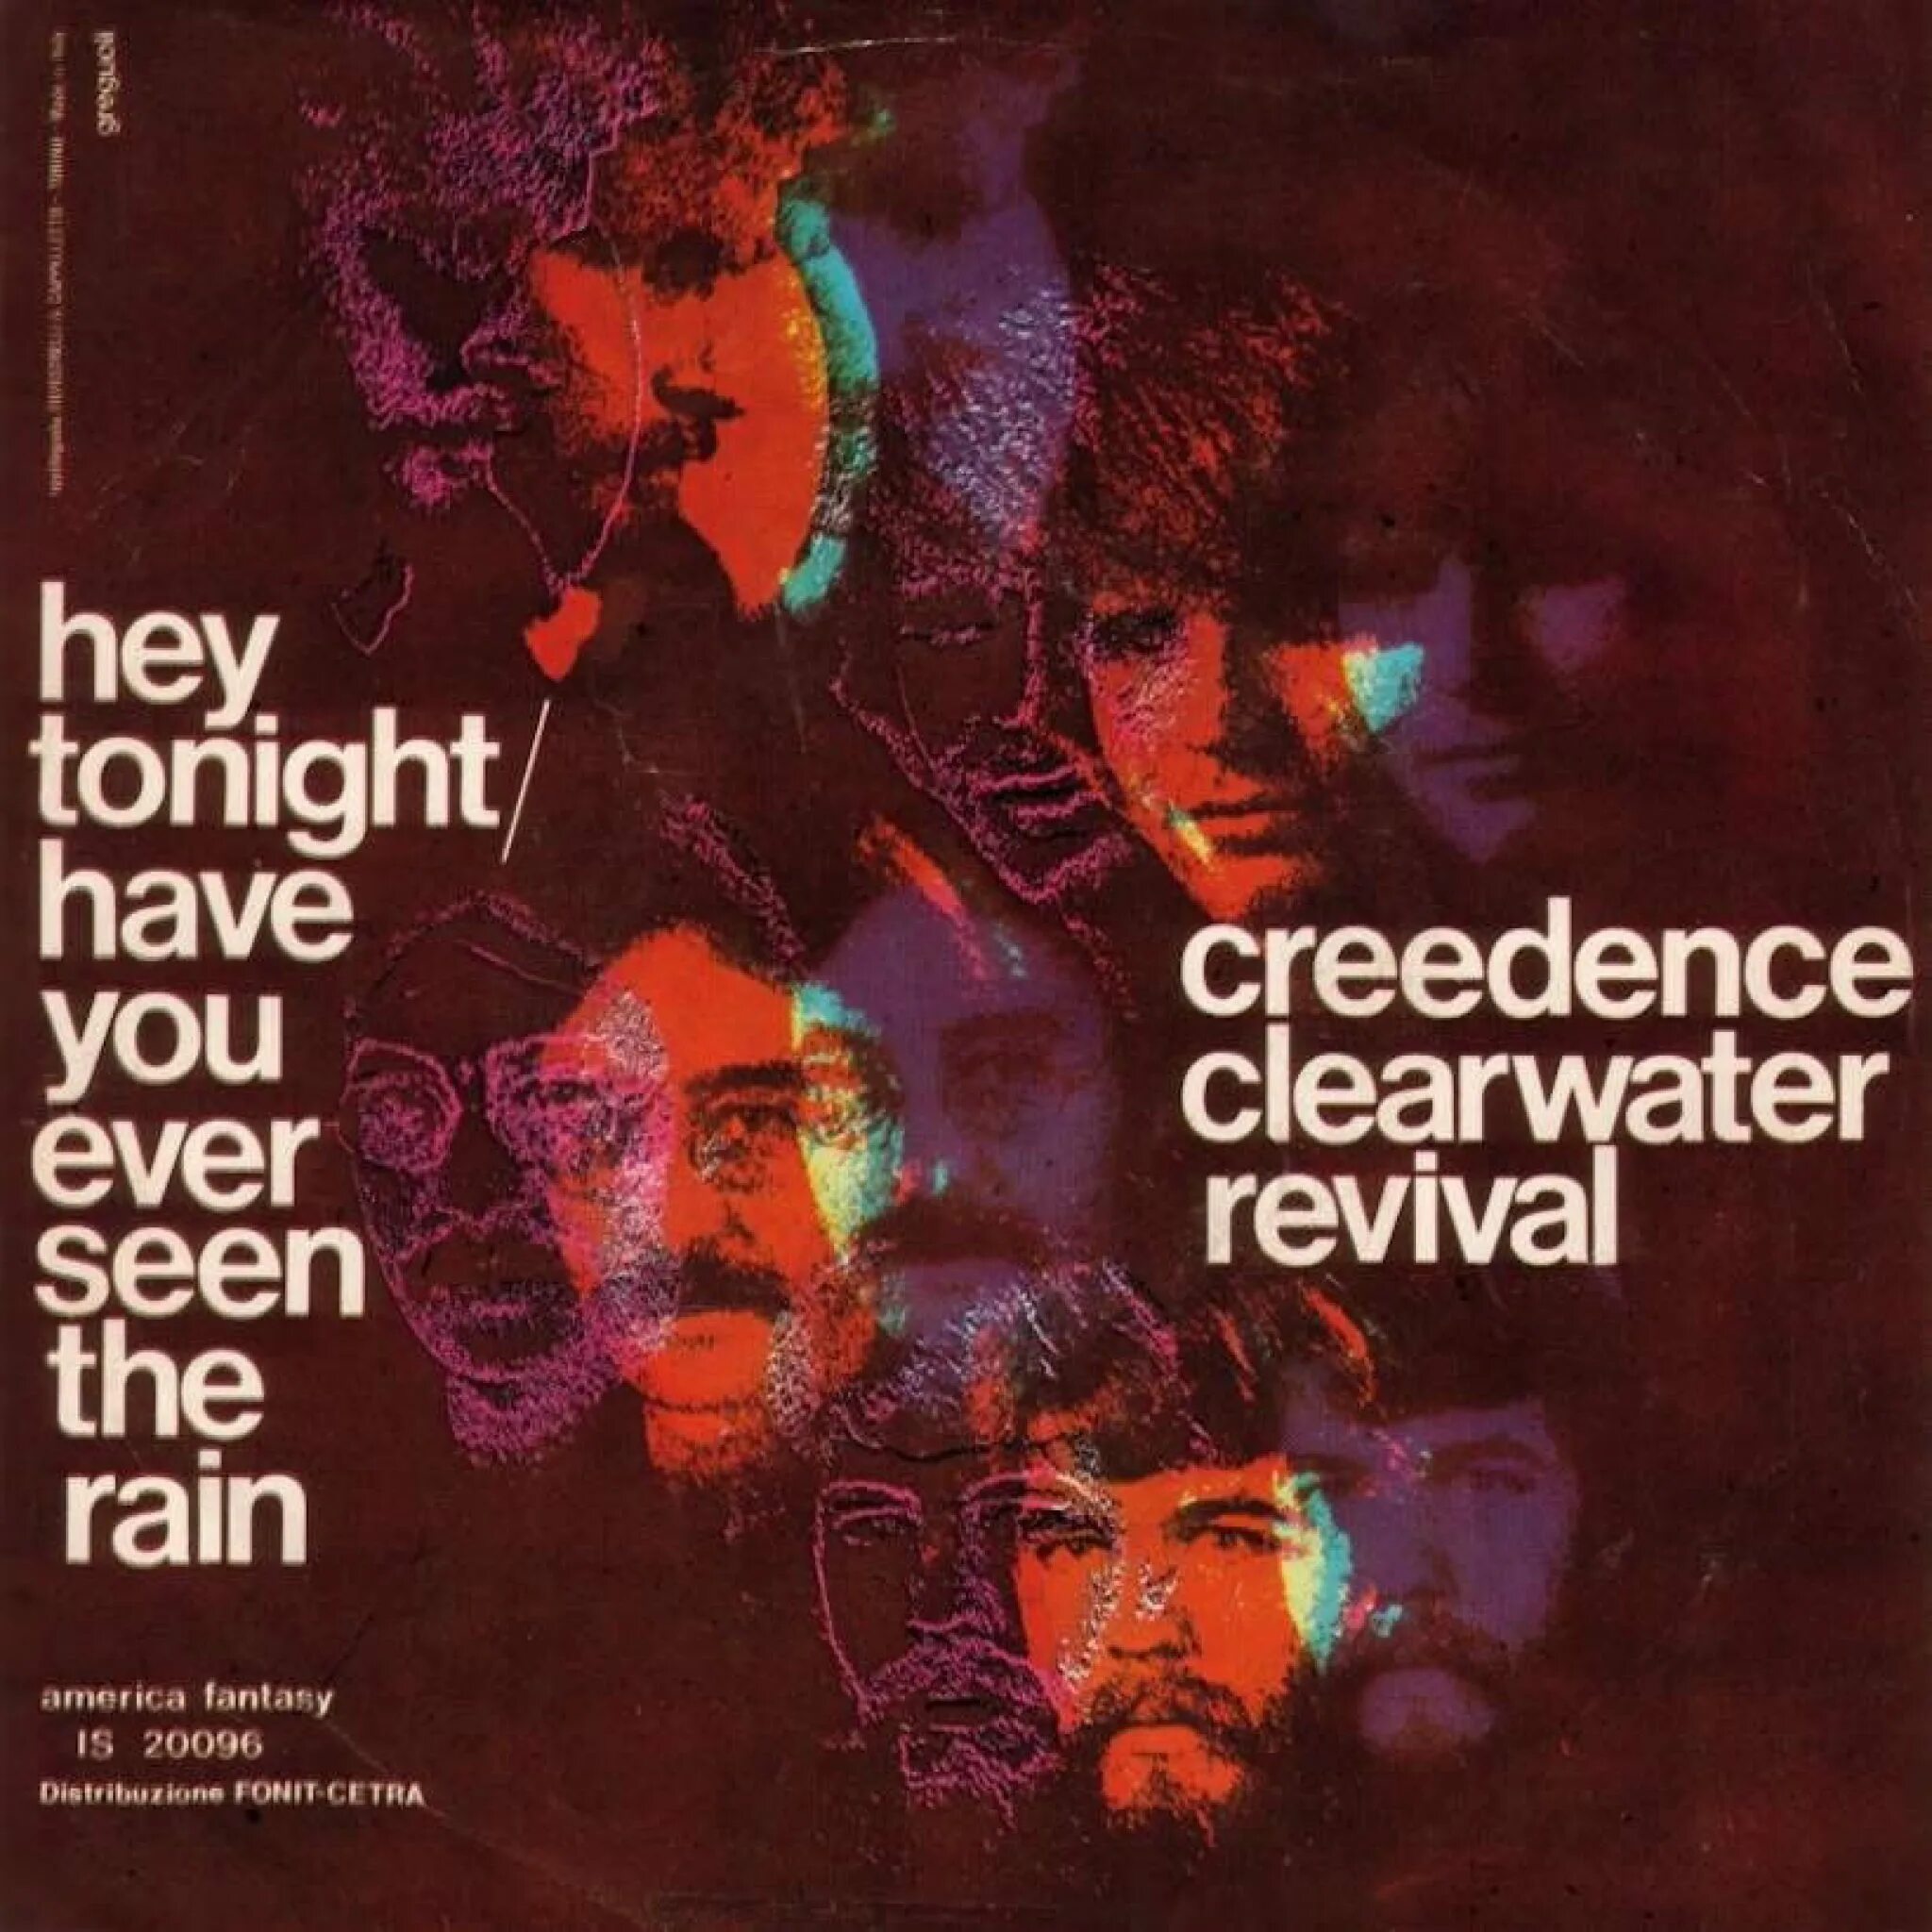 Creedence Clearwater Revival. Creedence Clearwater Revival - have you ever seen the Rain. Have you ever seen the Rain Криденс. Creedence Clearwater Revival - have you ever seen the Rain (1970). Creedence clearwater revival rain